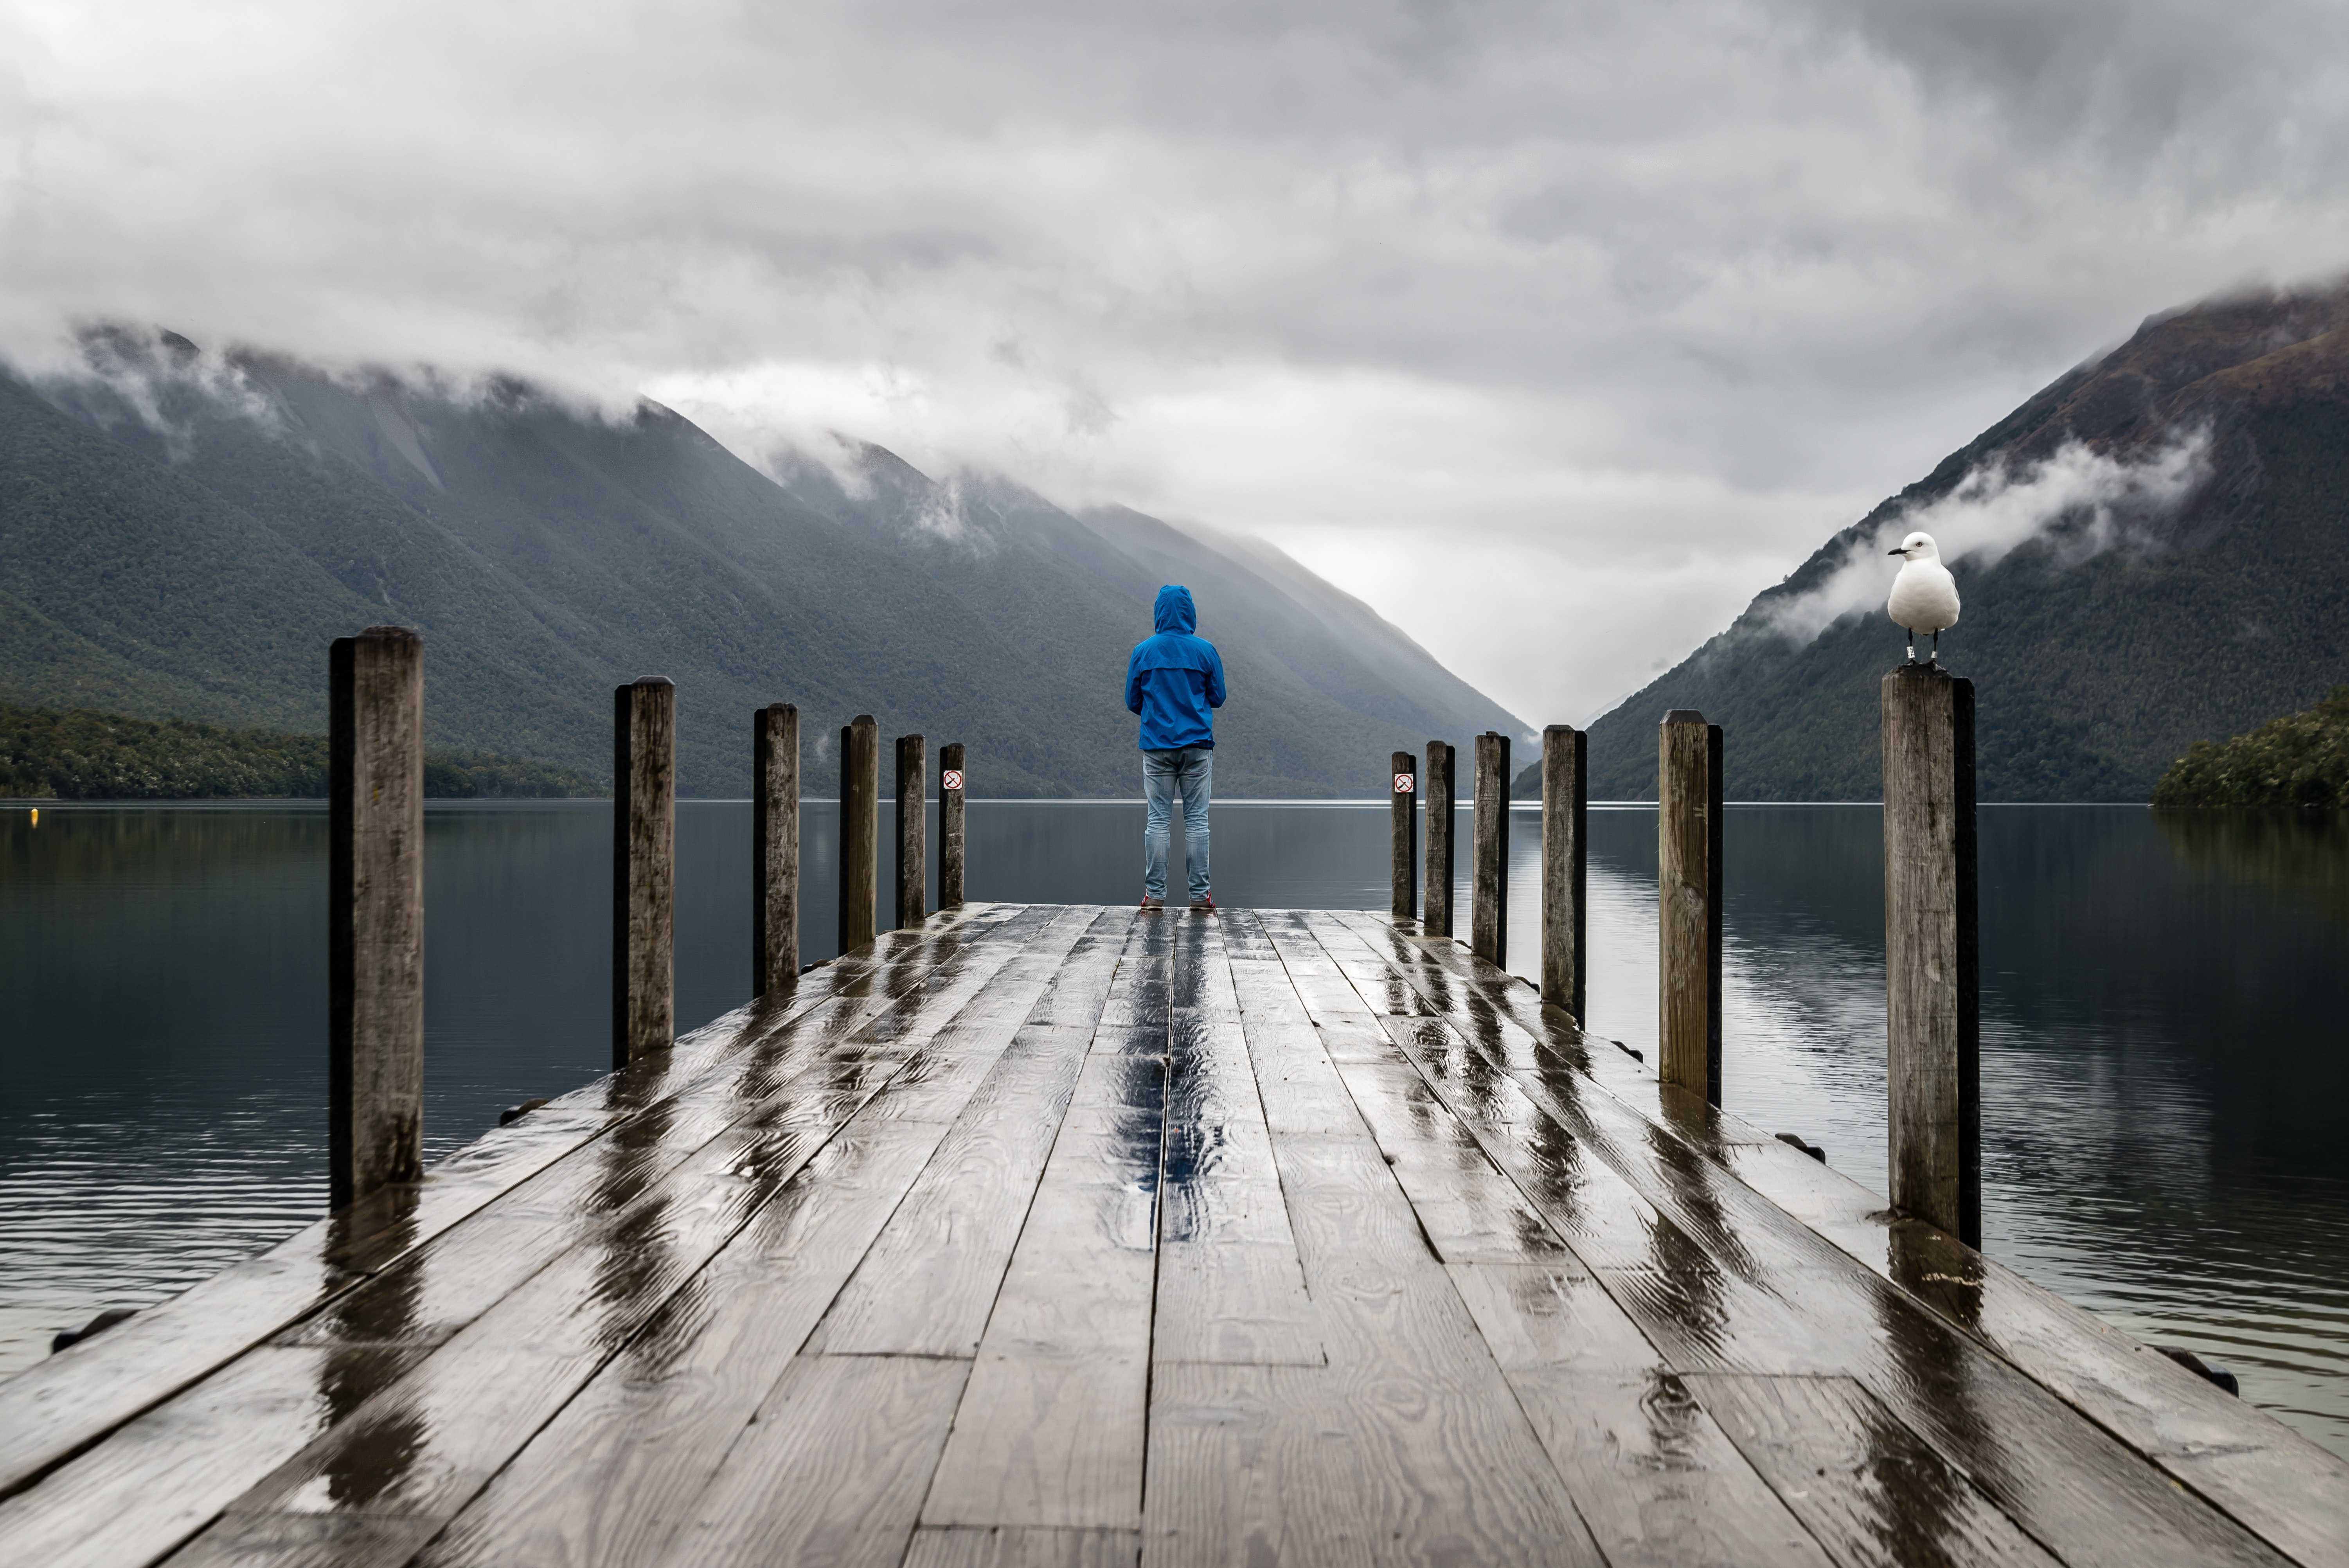 Boy standing at end of wet pier overlooking still lake with mountains in background